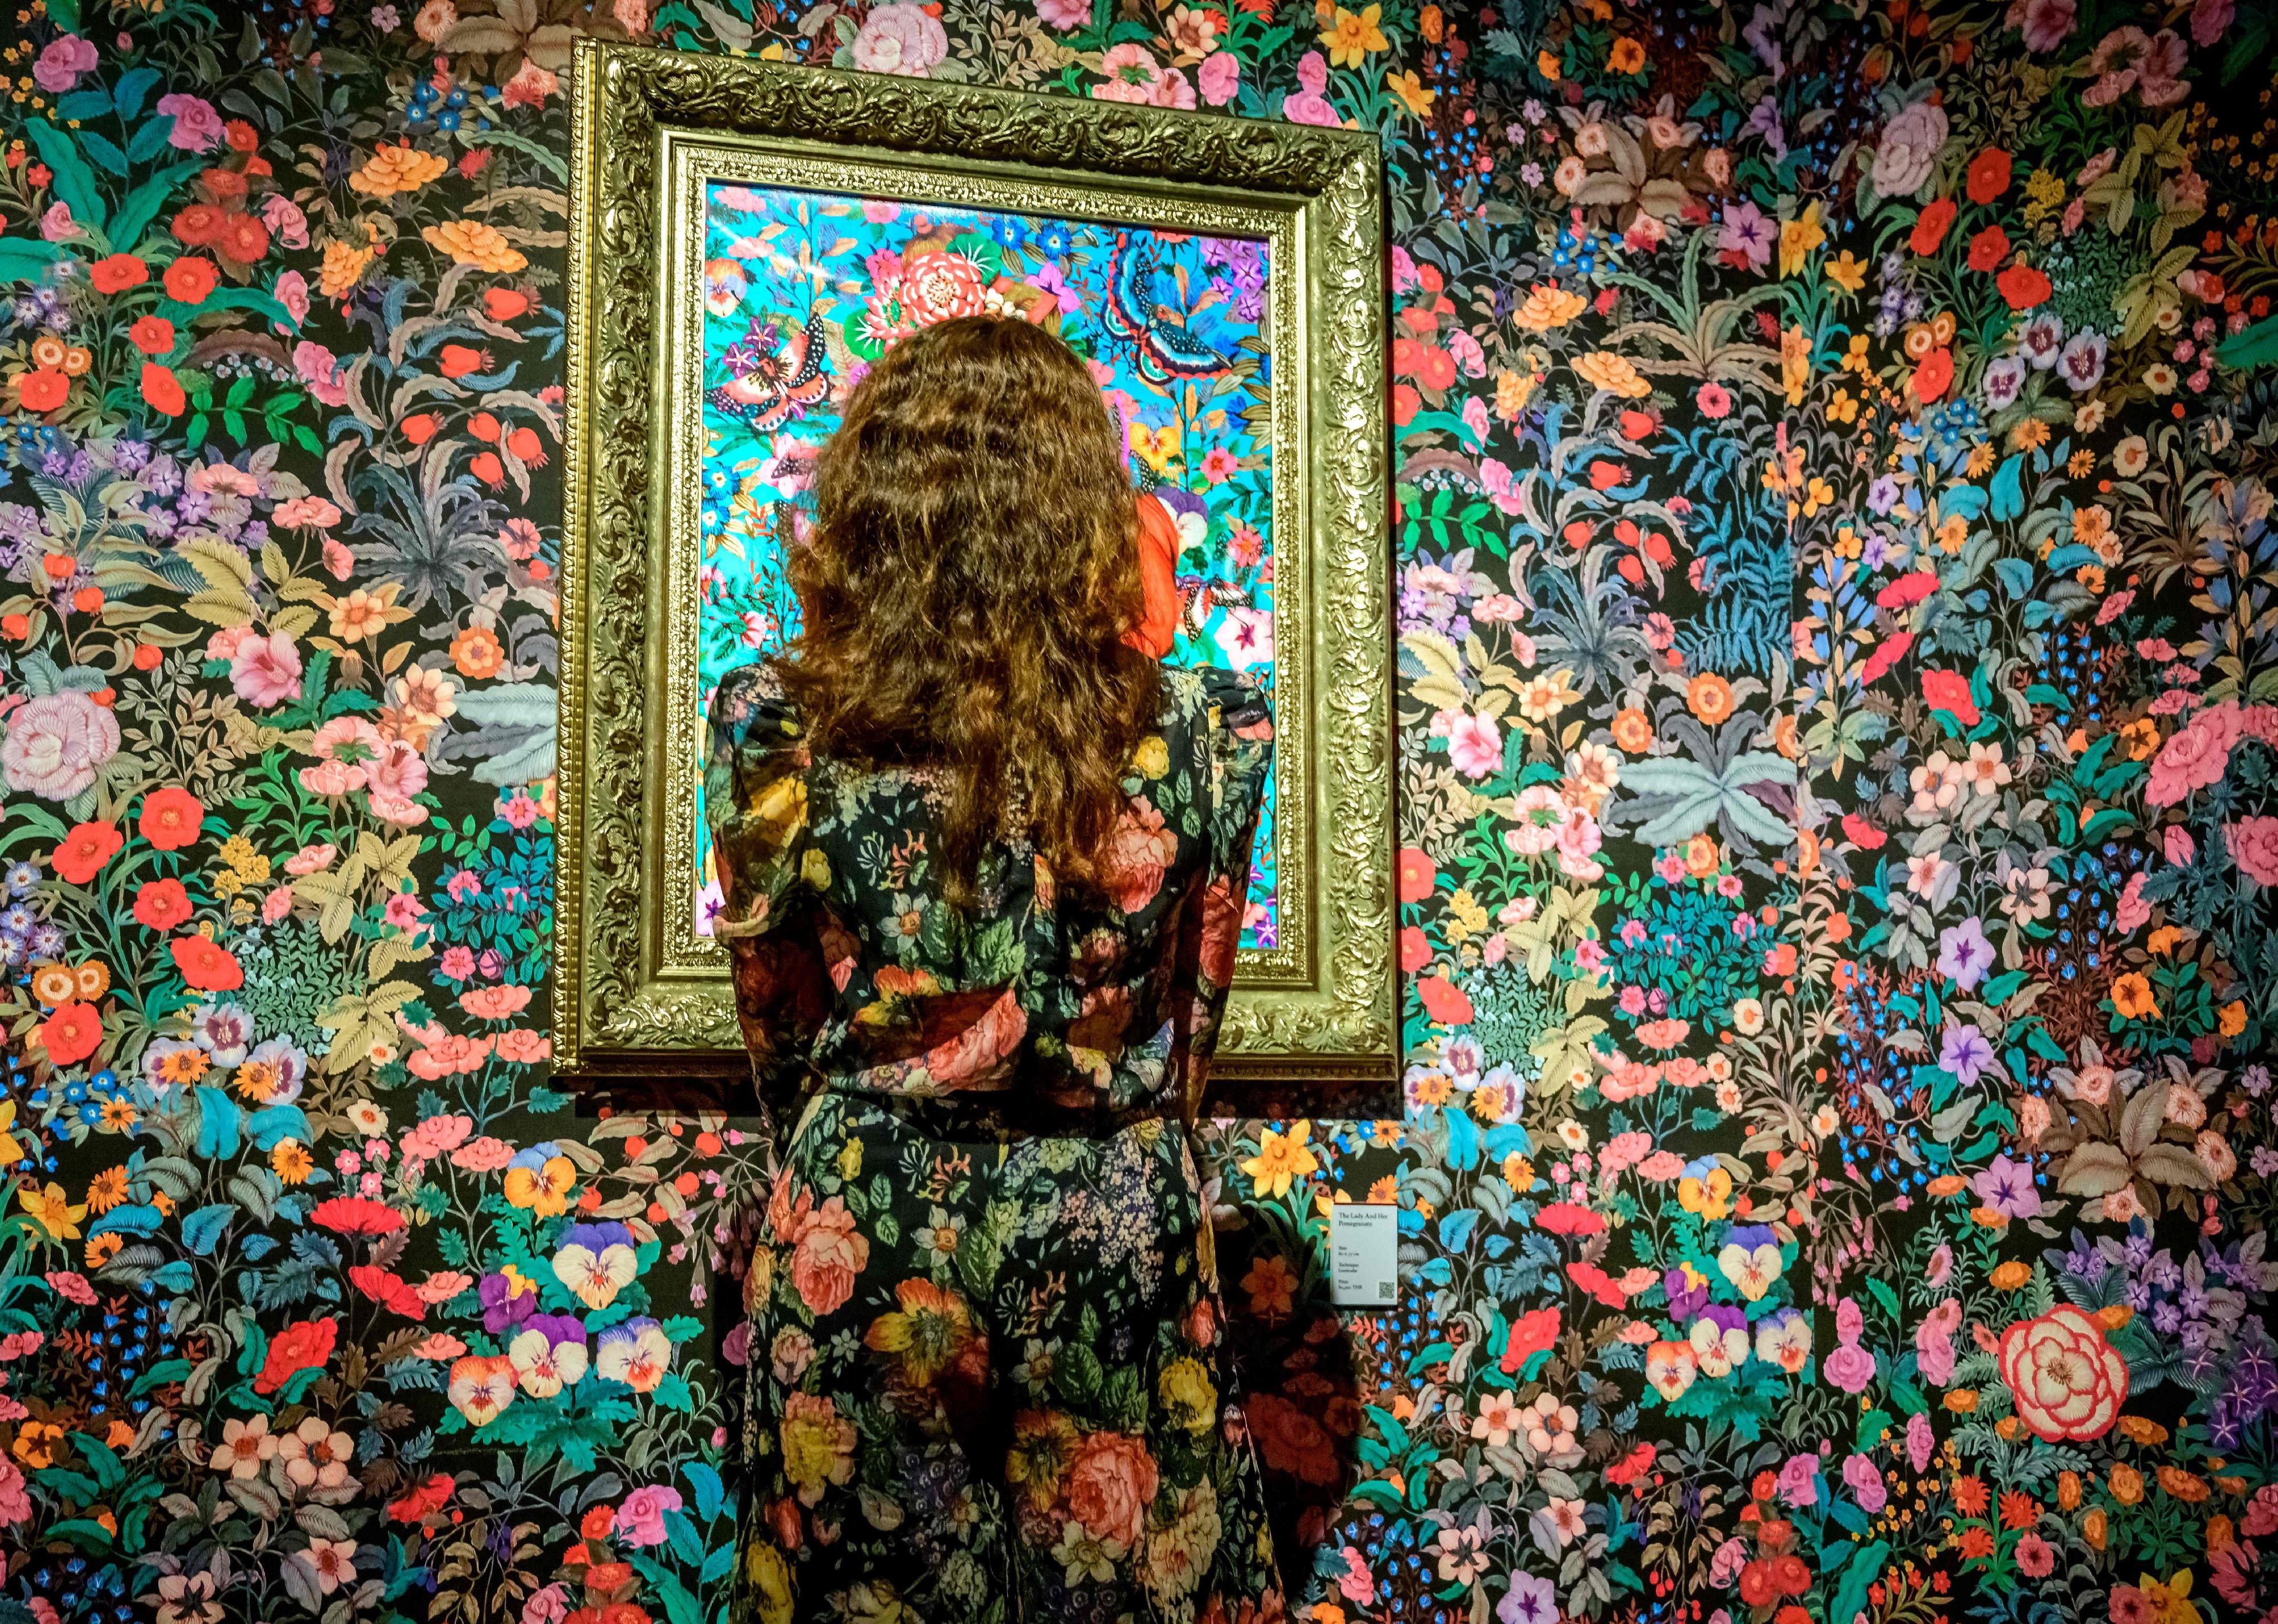 A woman dressed on floral print outfit looking at a painting by artist Phannapast "Yoon" Taychamaythakool that is surrounded by floral wallpaper.